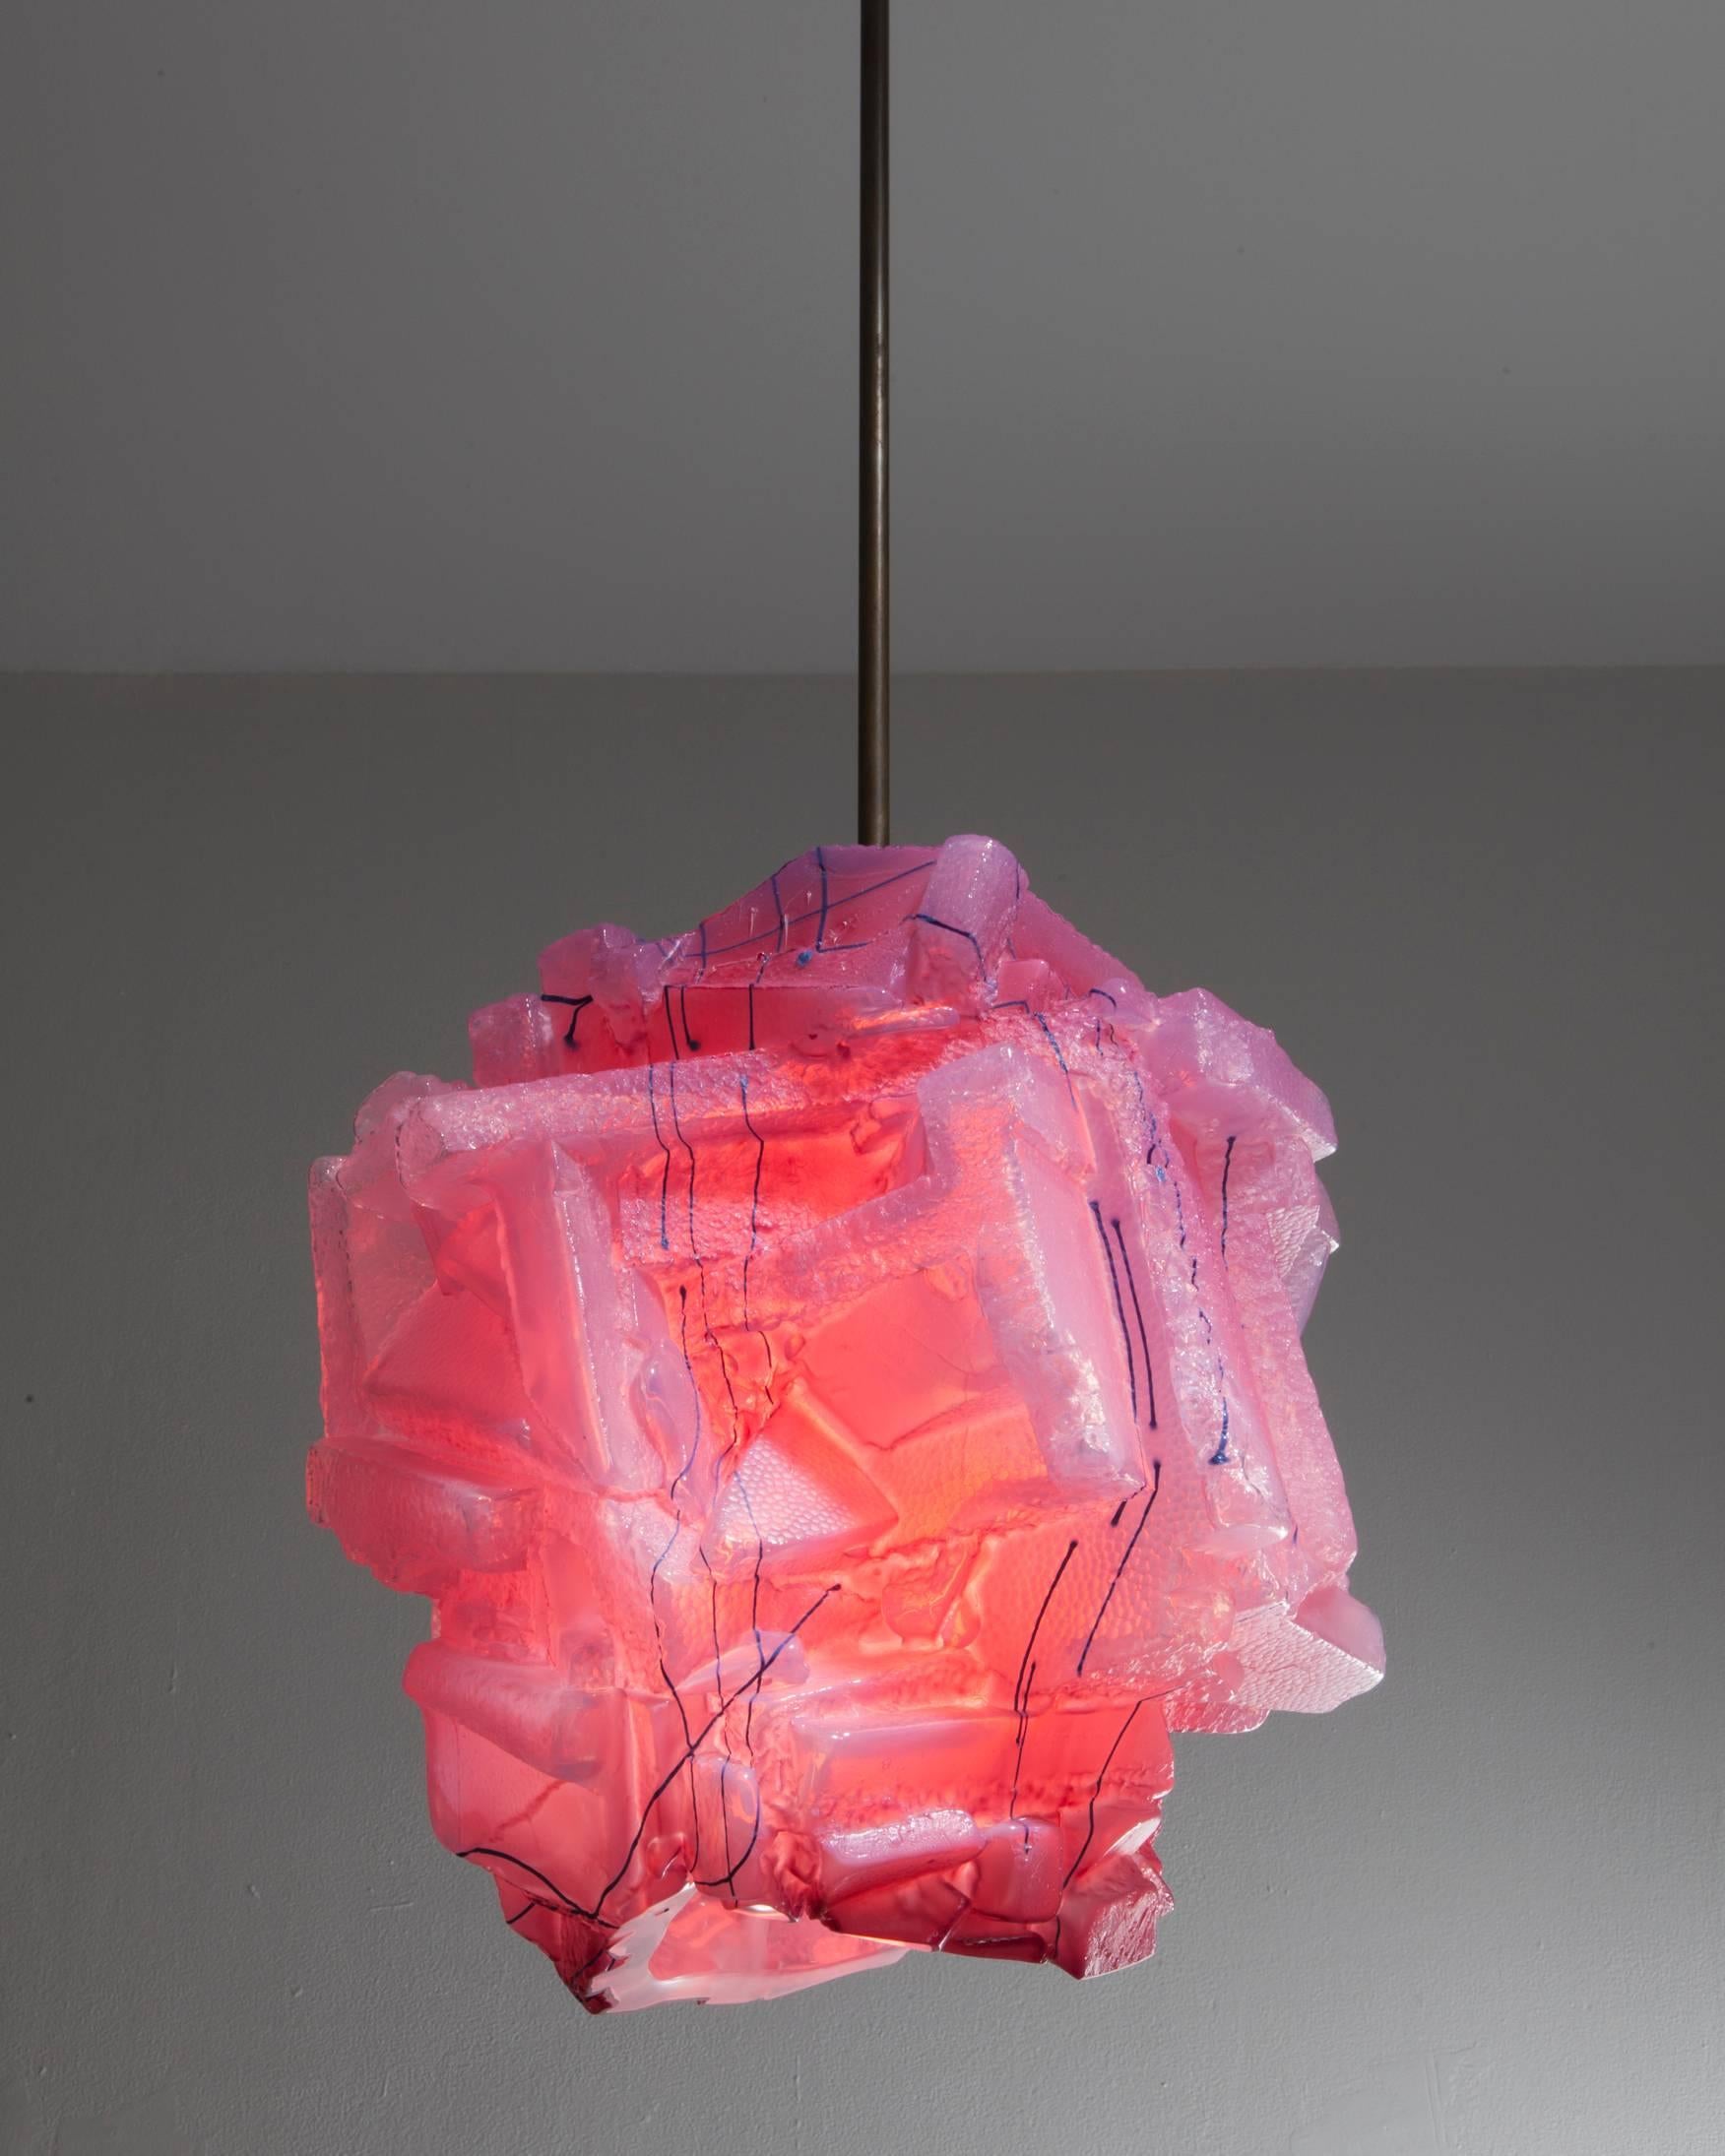 Unique Assemblage pendant lamp in hand-blown, cut and polished glass with coral-rose neon bulb. Designed and made by Thaddeus Wolfe, USA, 2015.